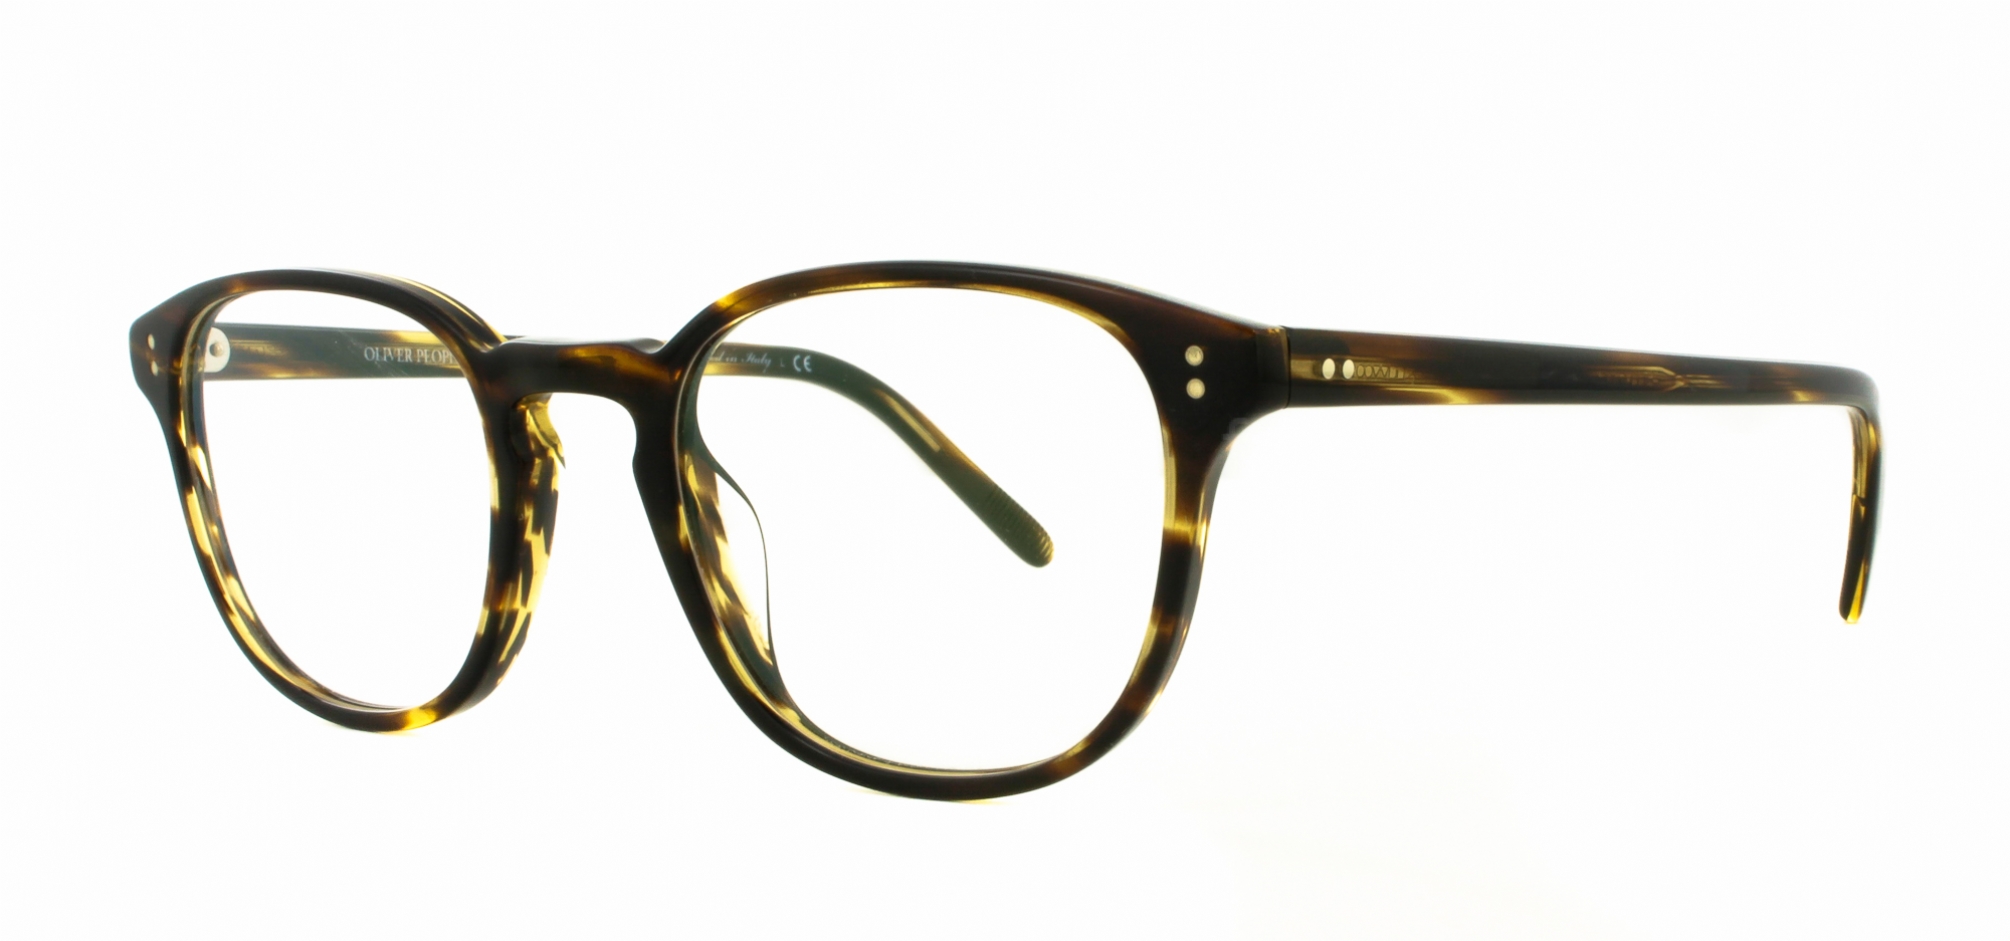 OLIVER PEOPLES FAIRMONT 1003